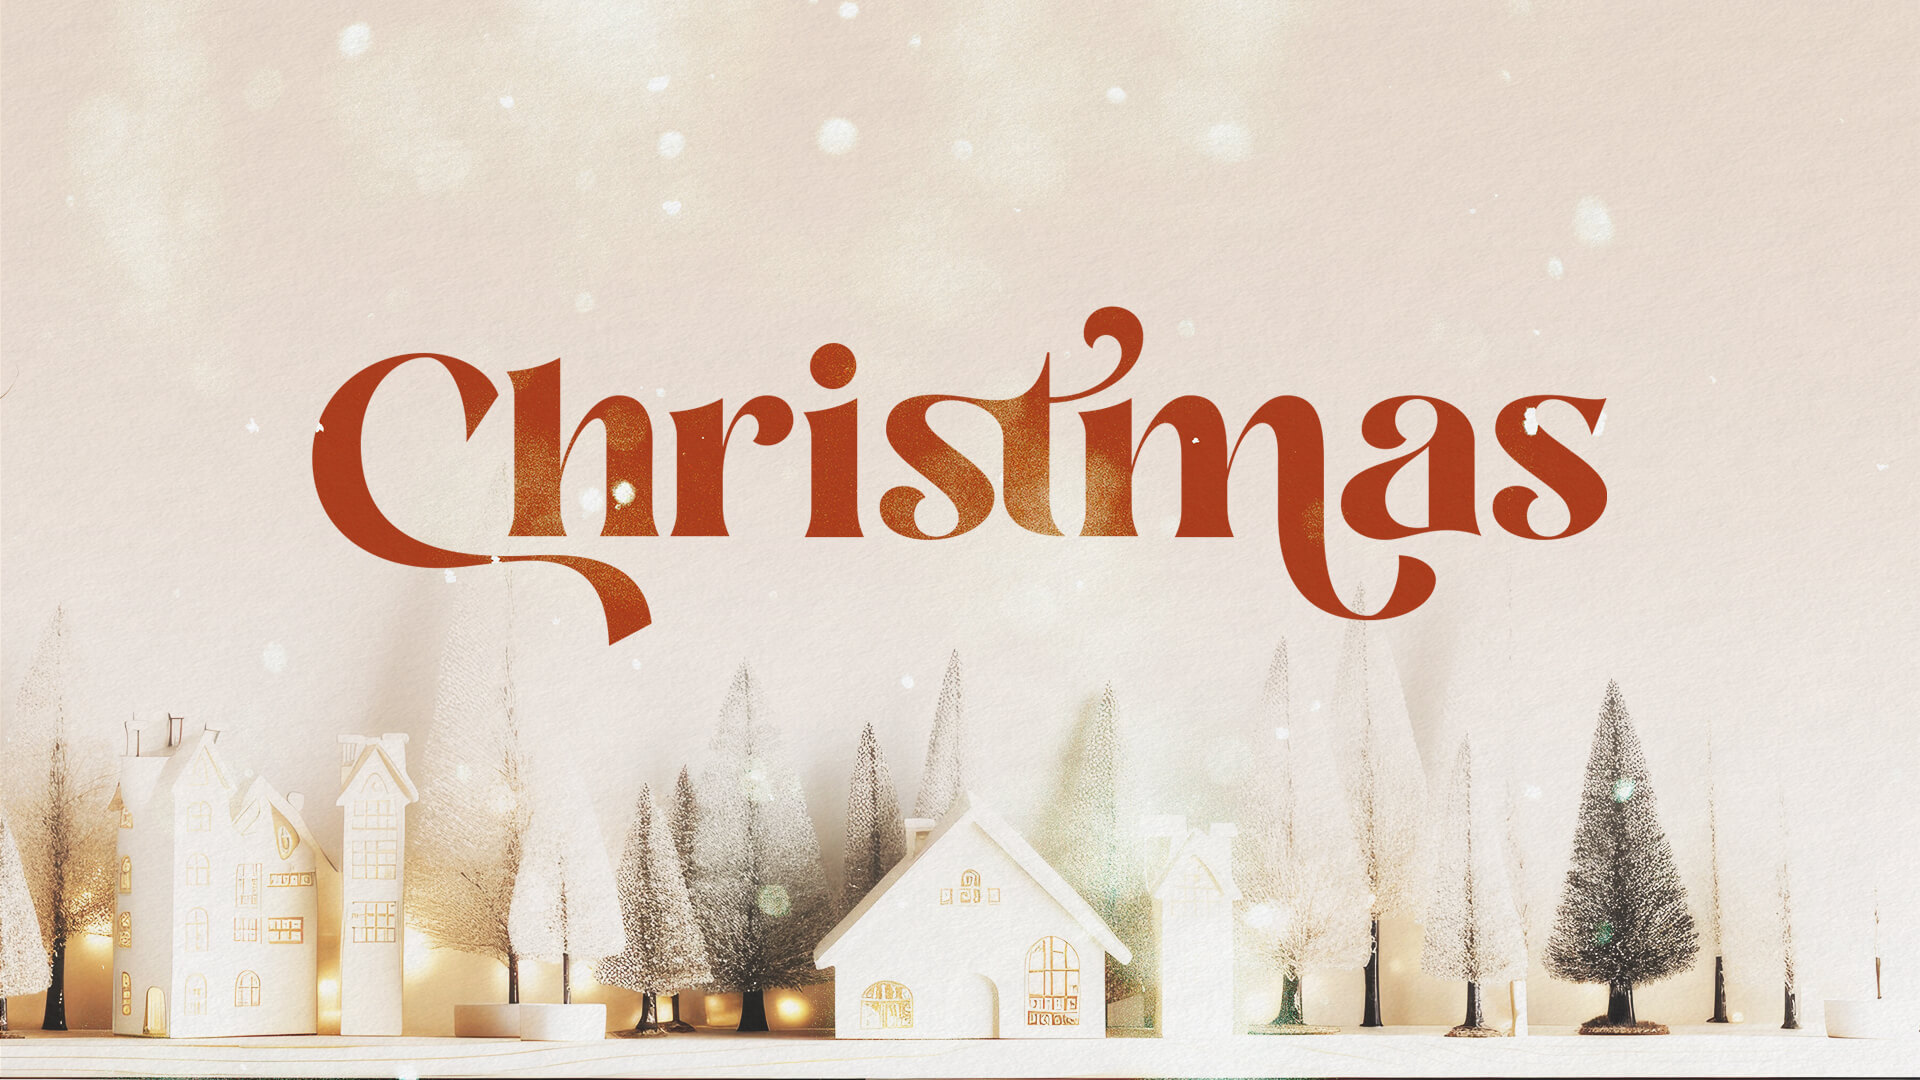 Christmas Hd Title Slide 2 1 1 | Remix Church Media | Editable Design Templates And Resources Made For The Church.